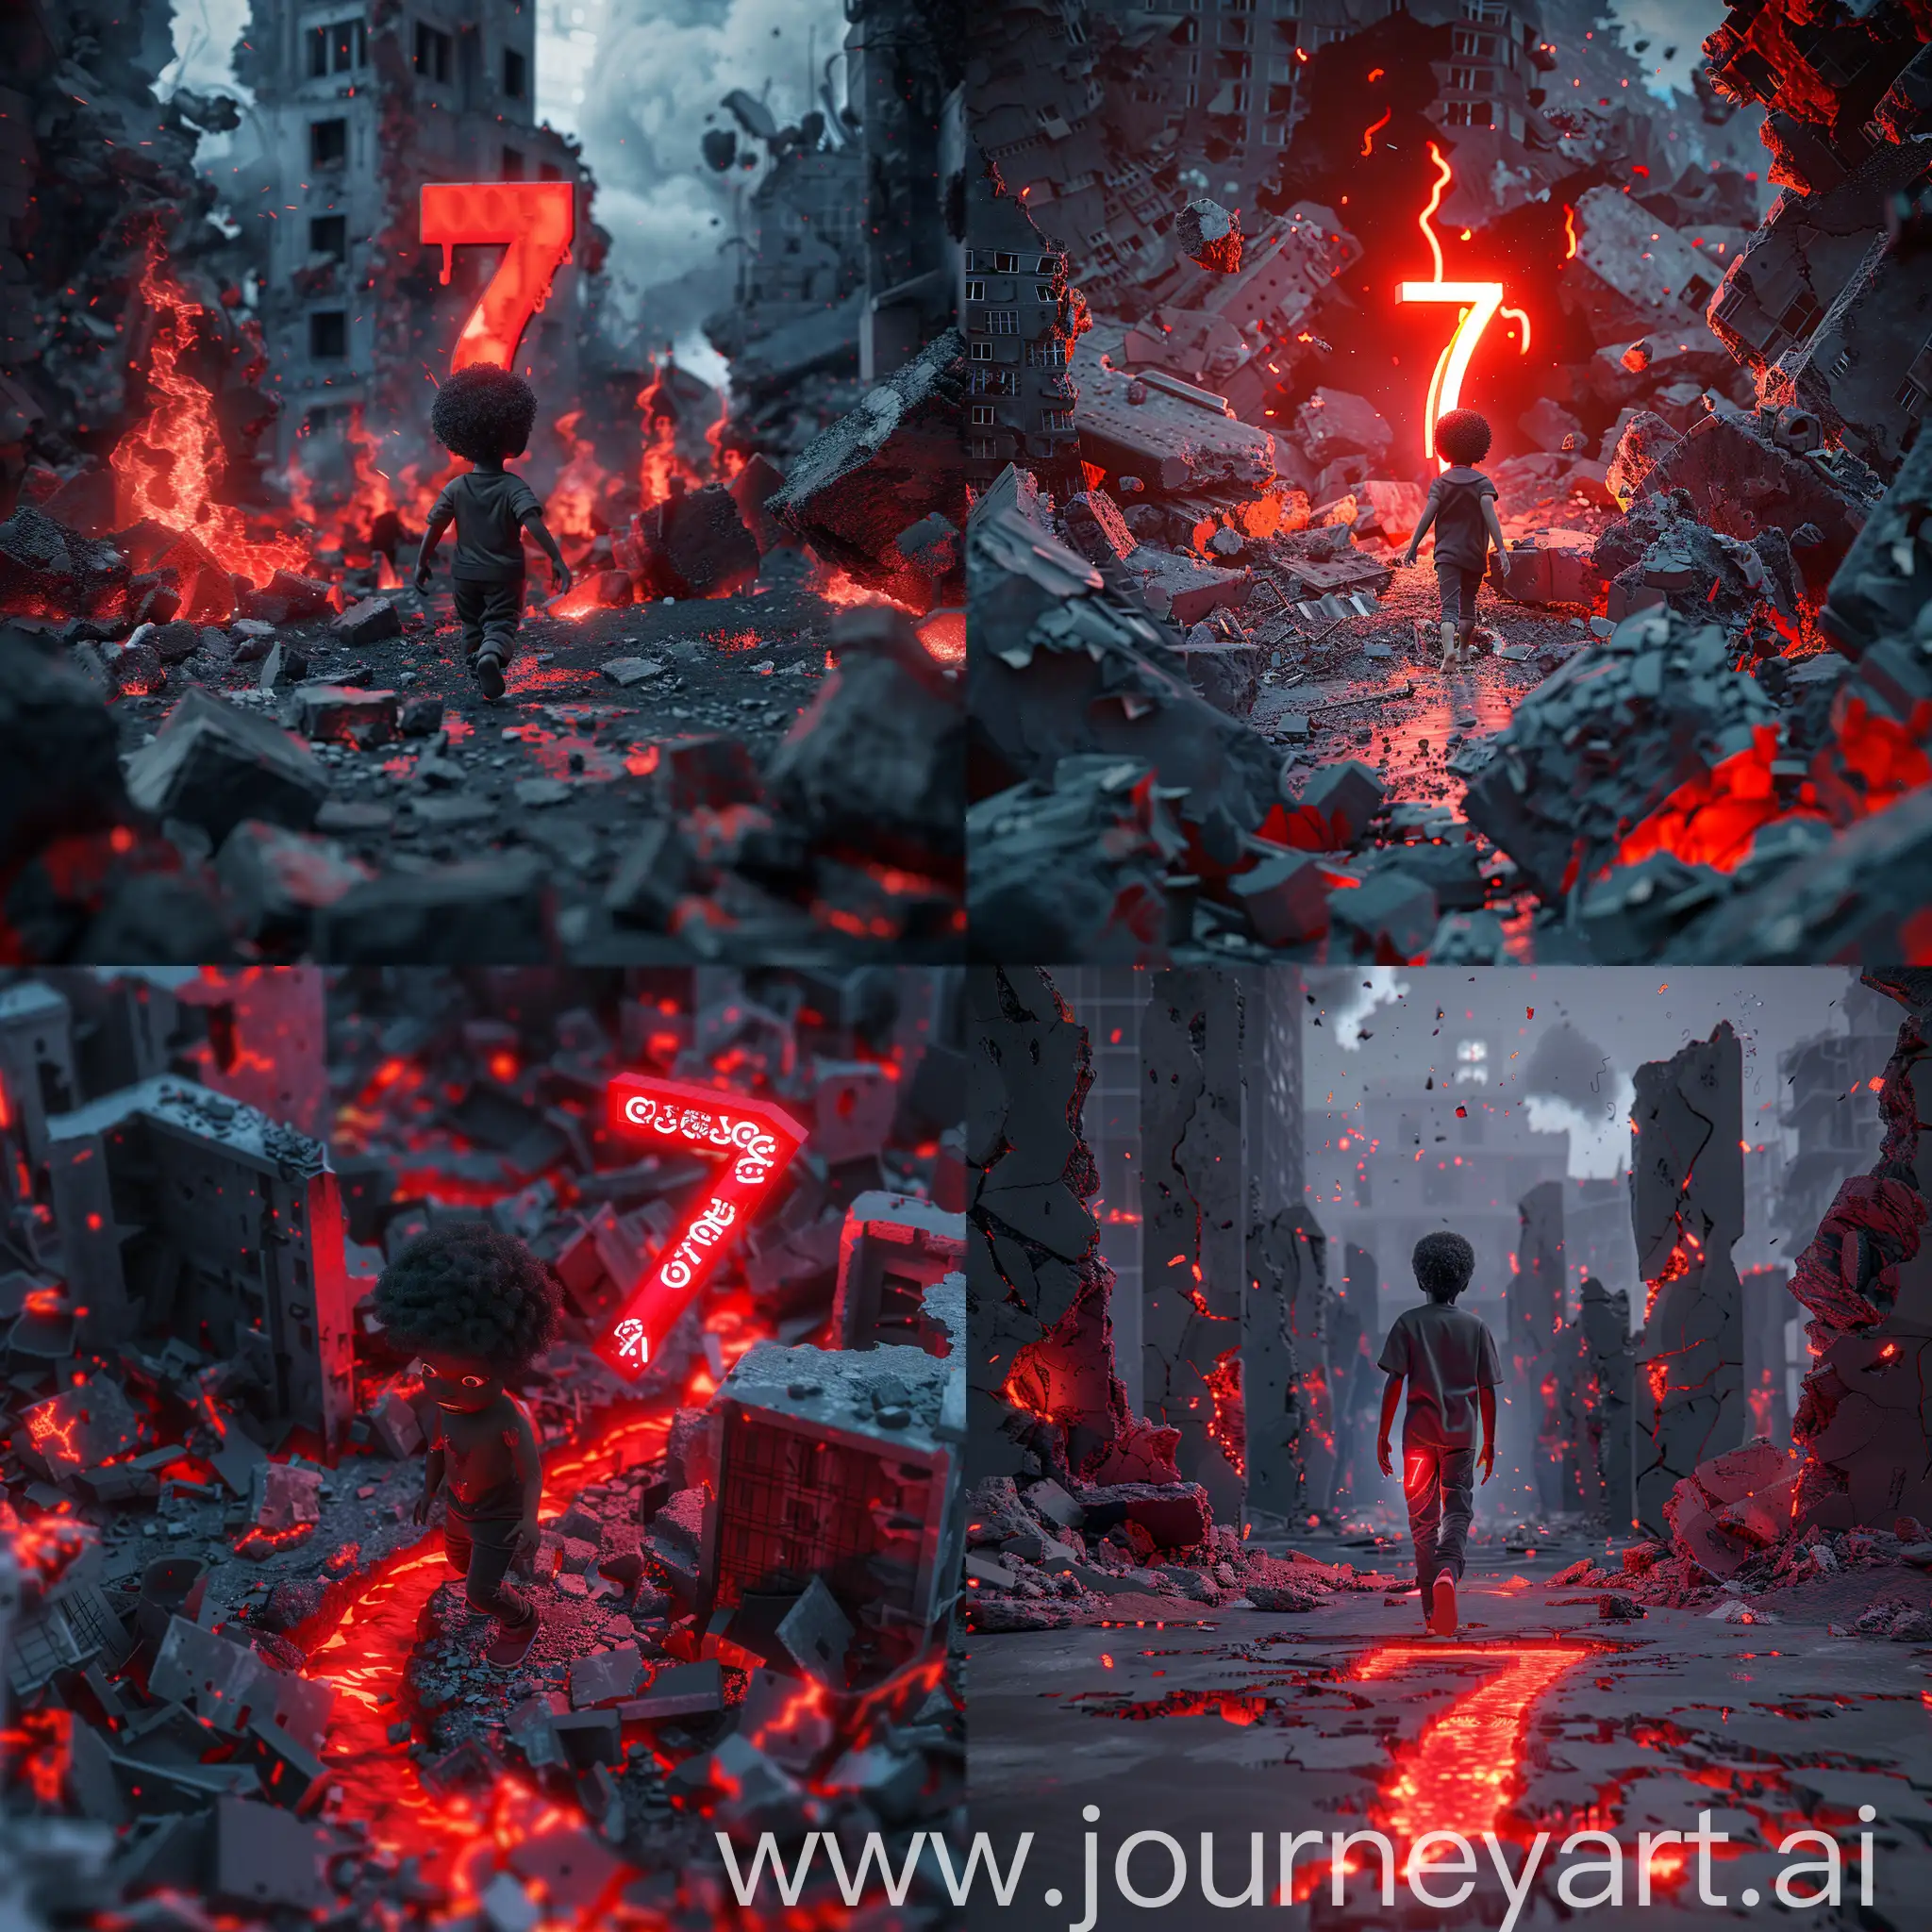 3D realistic image wherby It's the end of the world, buildings have crumbled and there are red flames everywhere and a black kid in tears who seems lost and hopeless is walking towards a glowing red number 7 which will hive him power